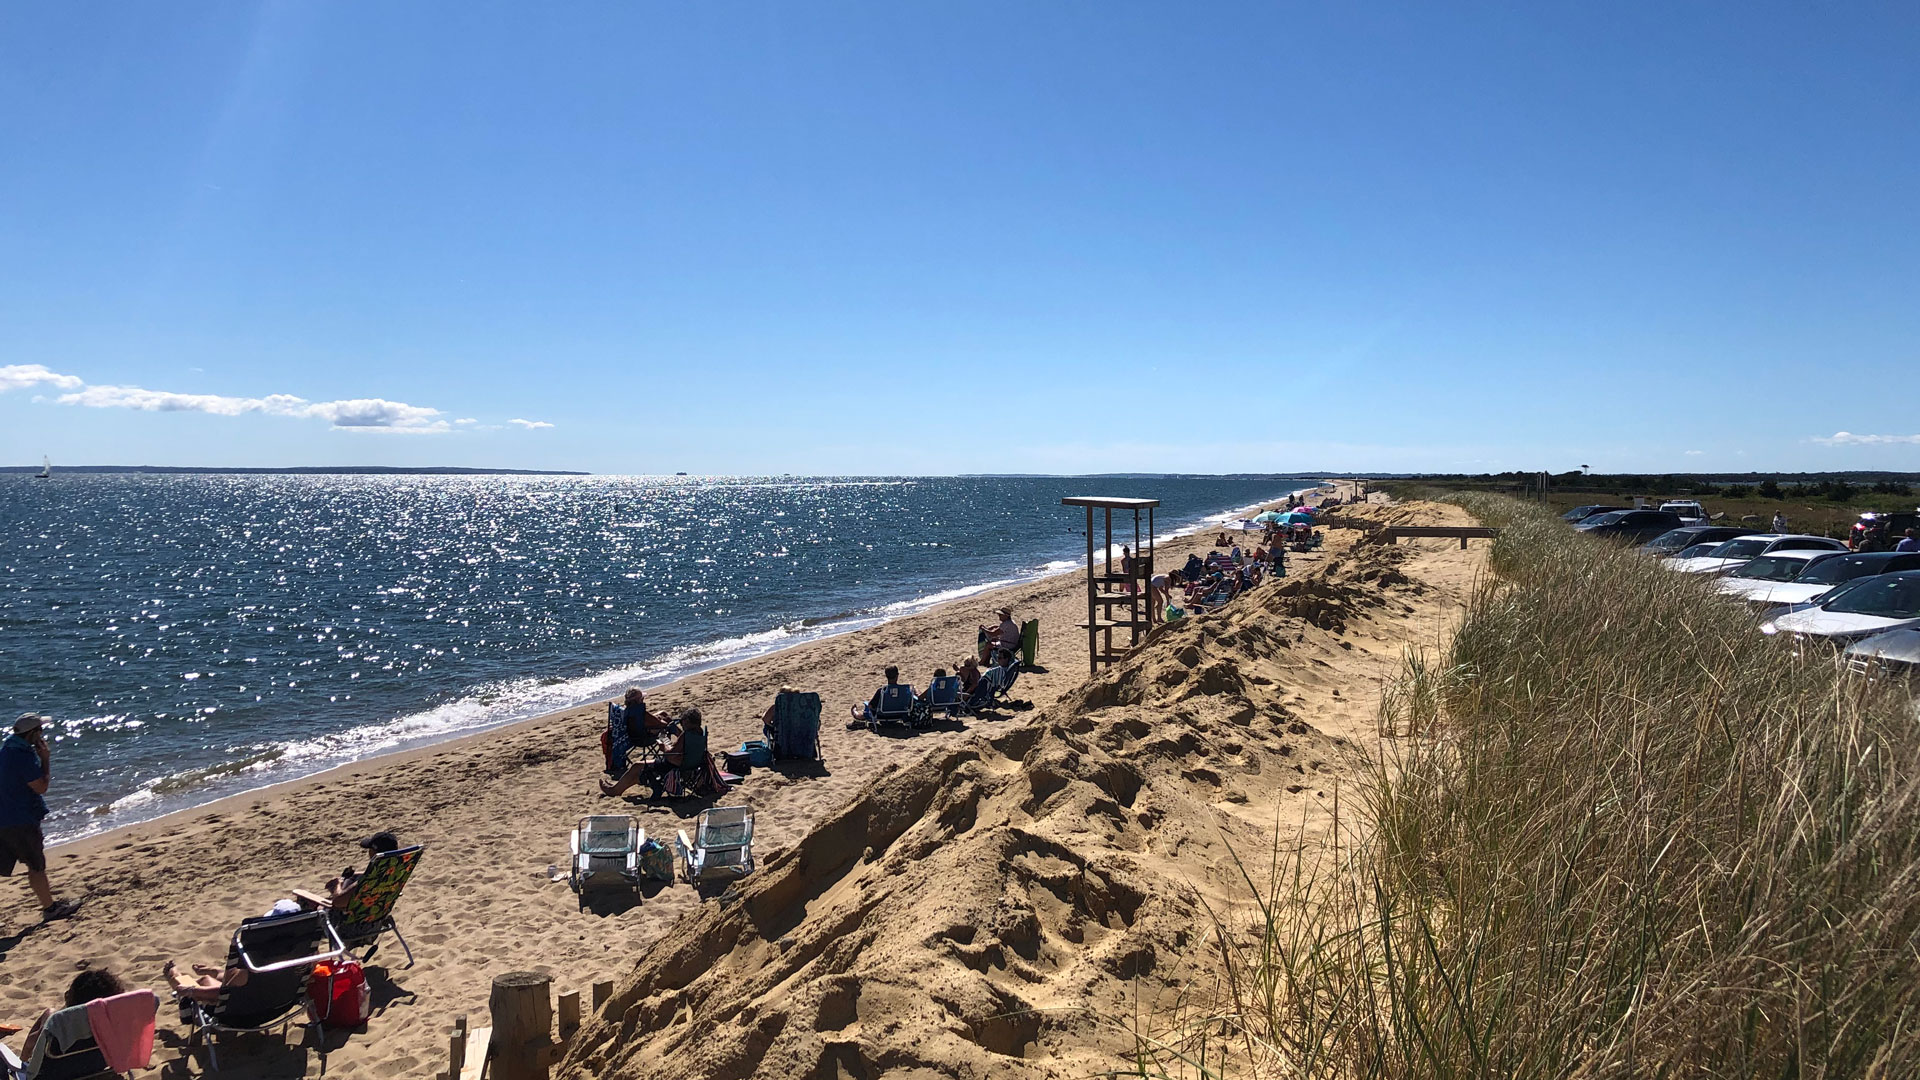 Crowds line the shores of one of the Mashpee Beaches on Cape Cod.